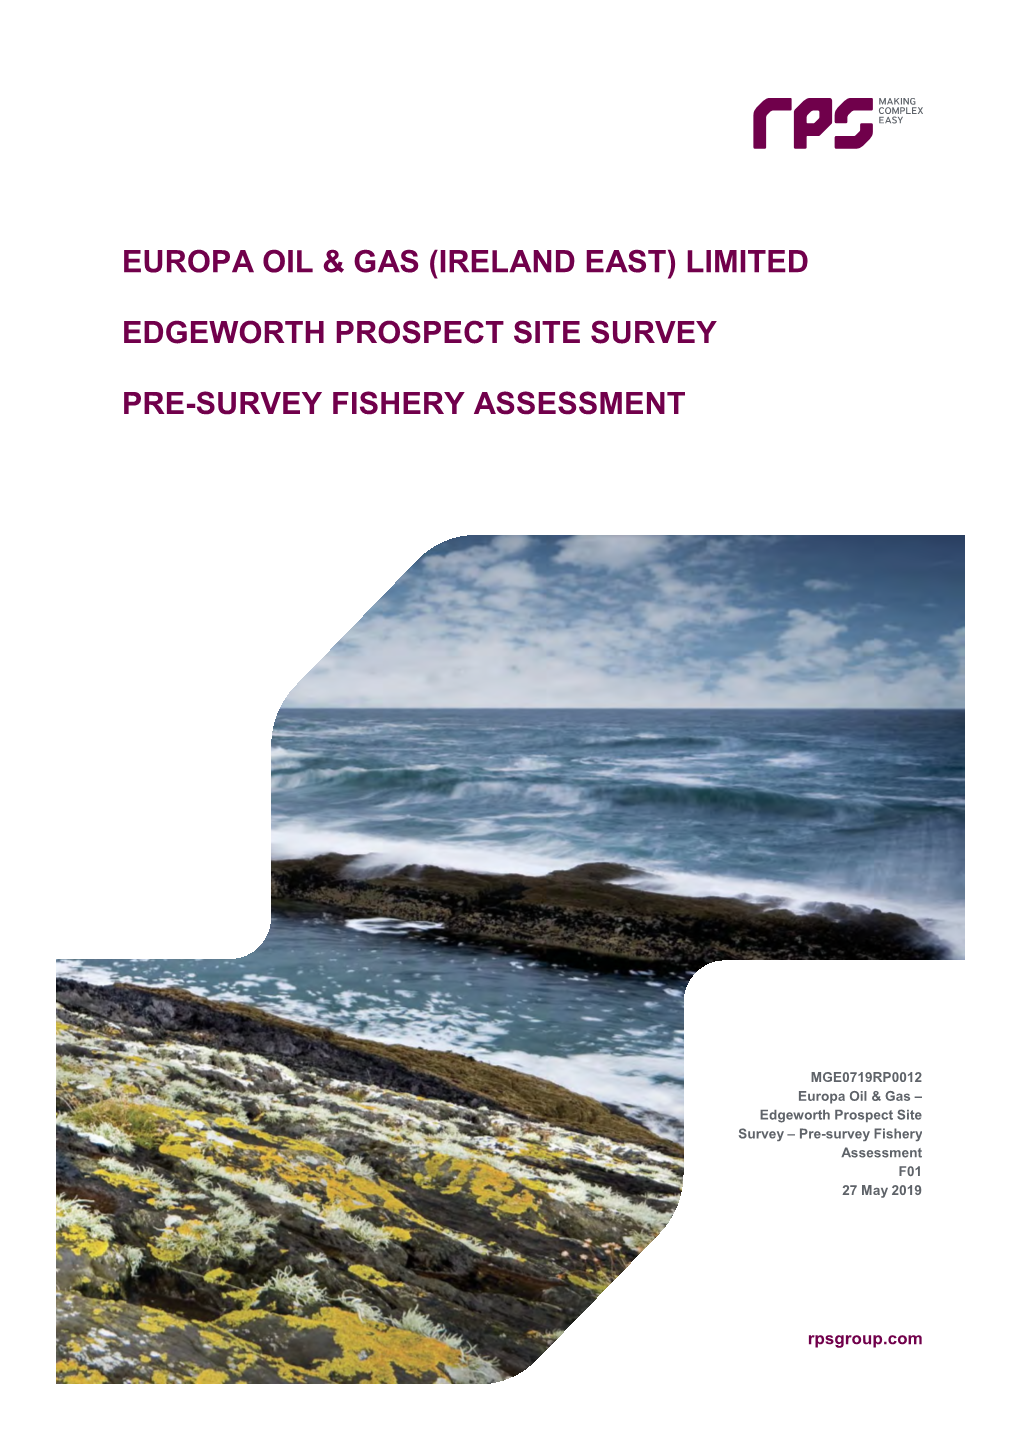 Europa Oil & Gas (Ireland East) Limited Edgeworth Prospect Site Survey Pre-Survey Fishery Assessment